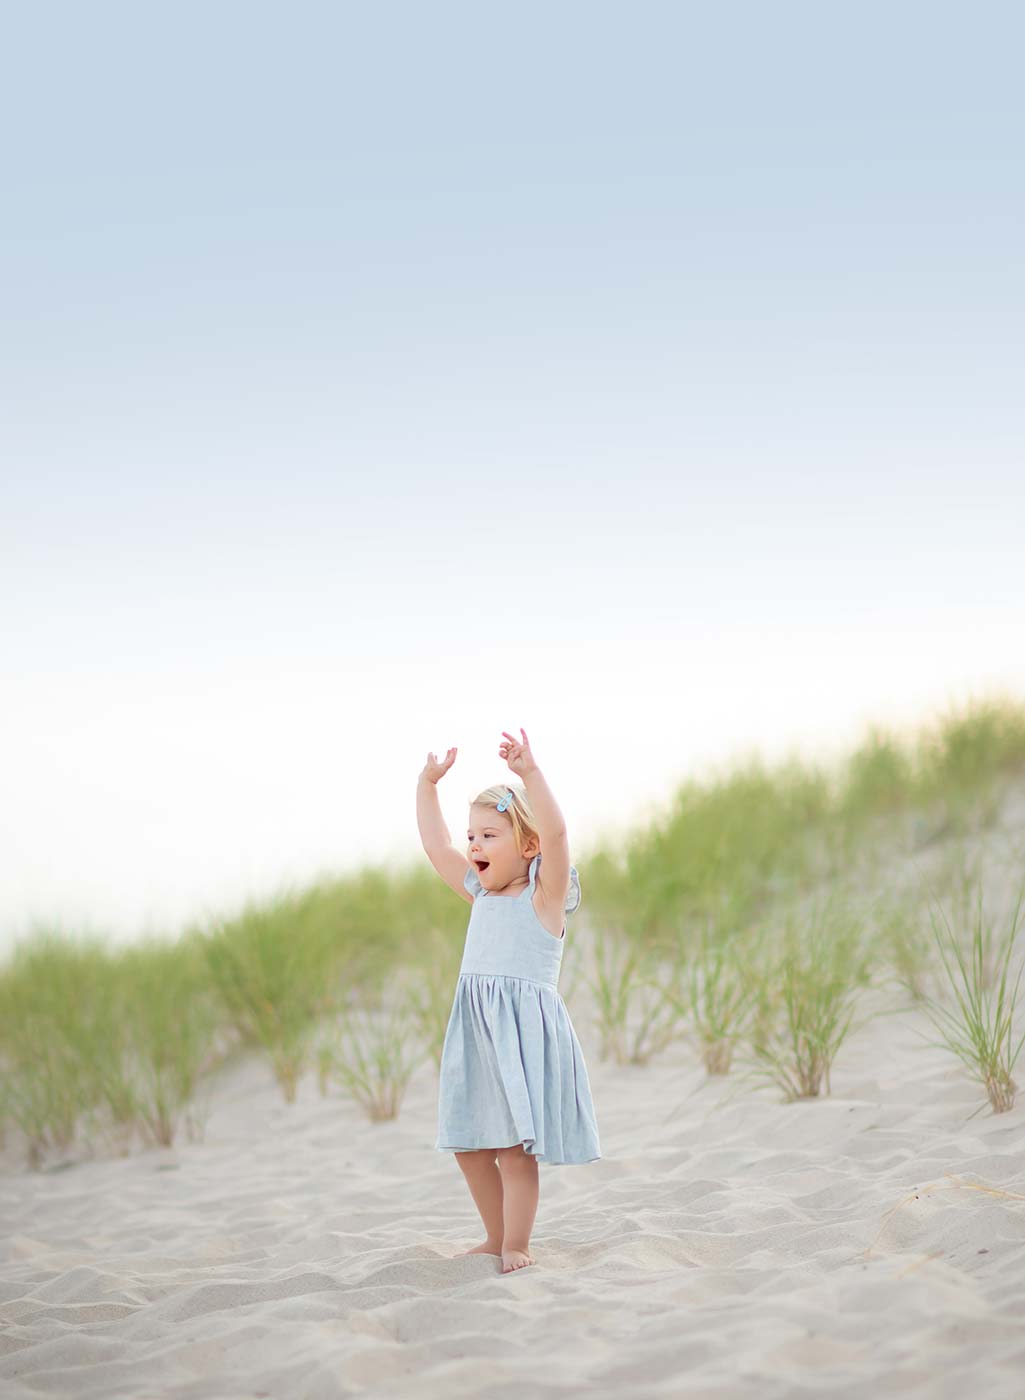 Young girl in a dress waving her hands at a beach in East Hampton NY